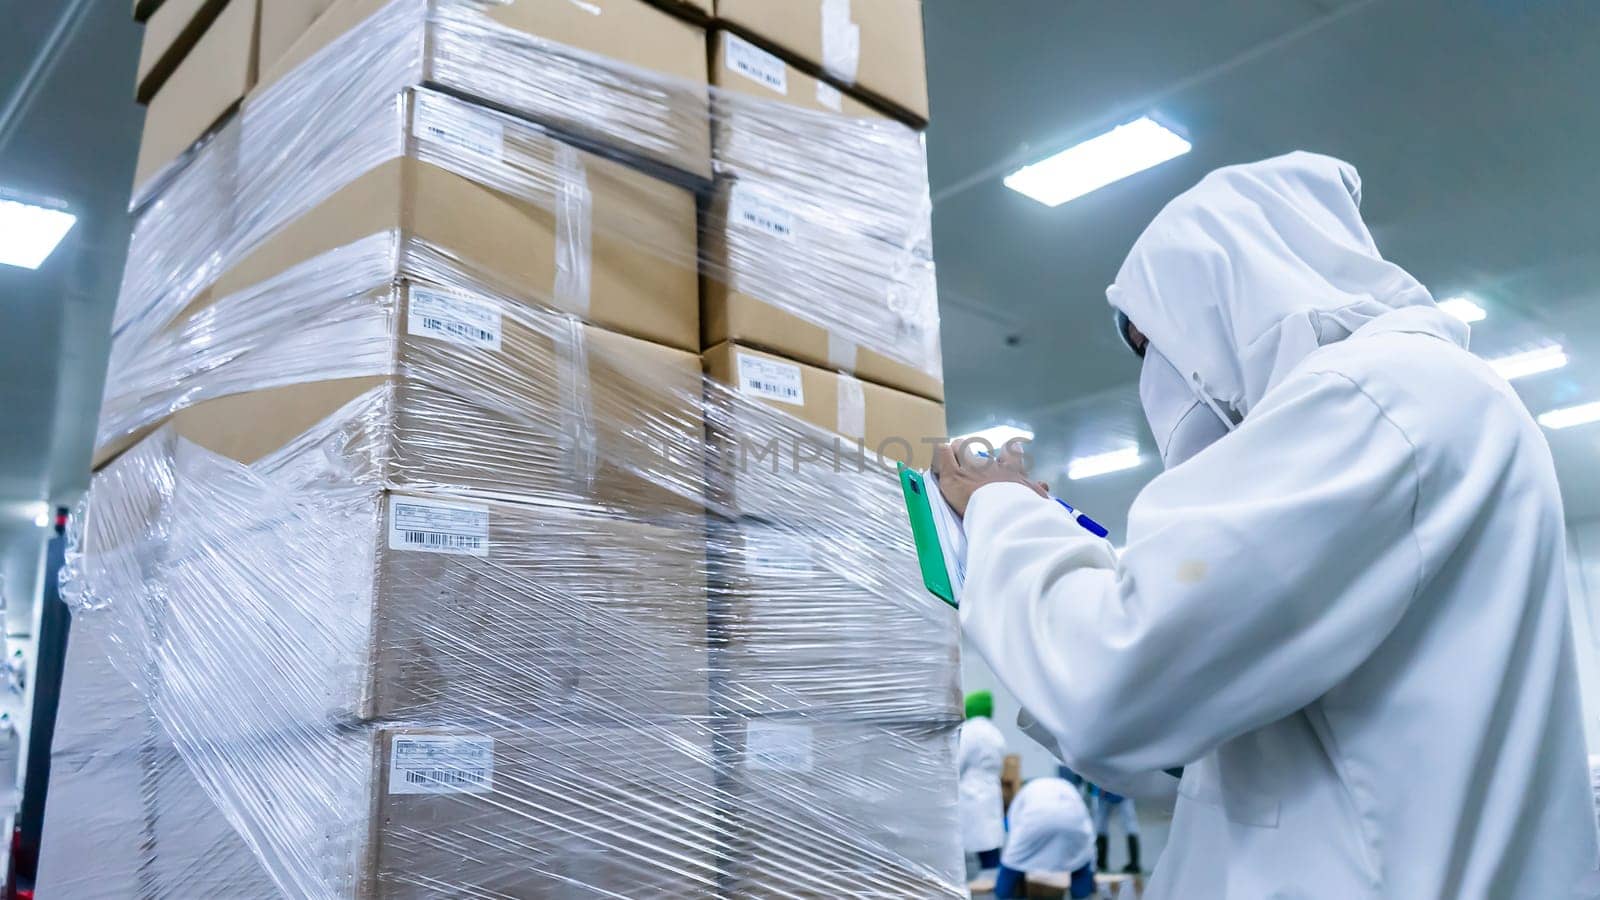 Safety and quality inspector inventorying product packed in cardboard boxes at a food processing plant by cfalvarez